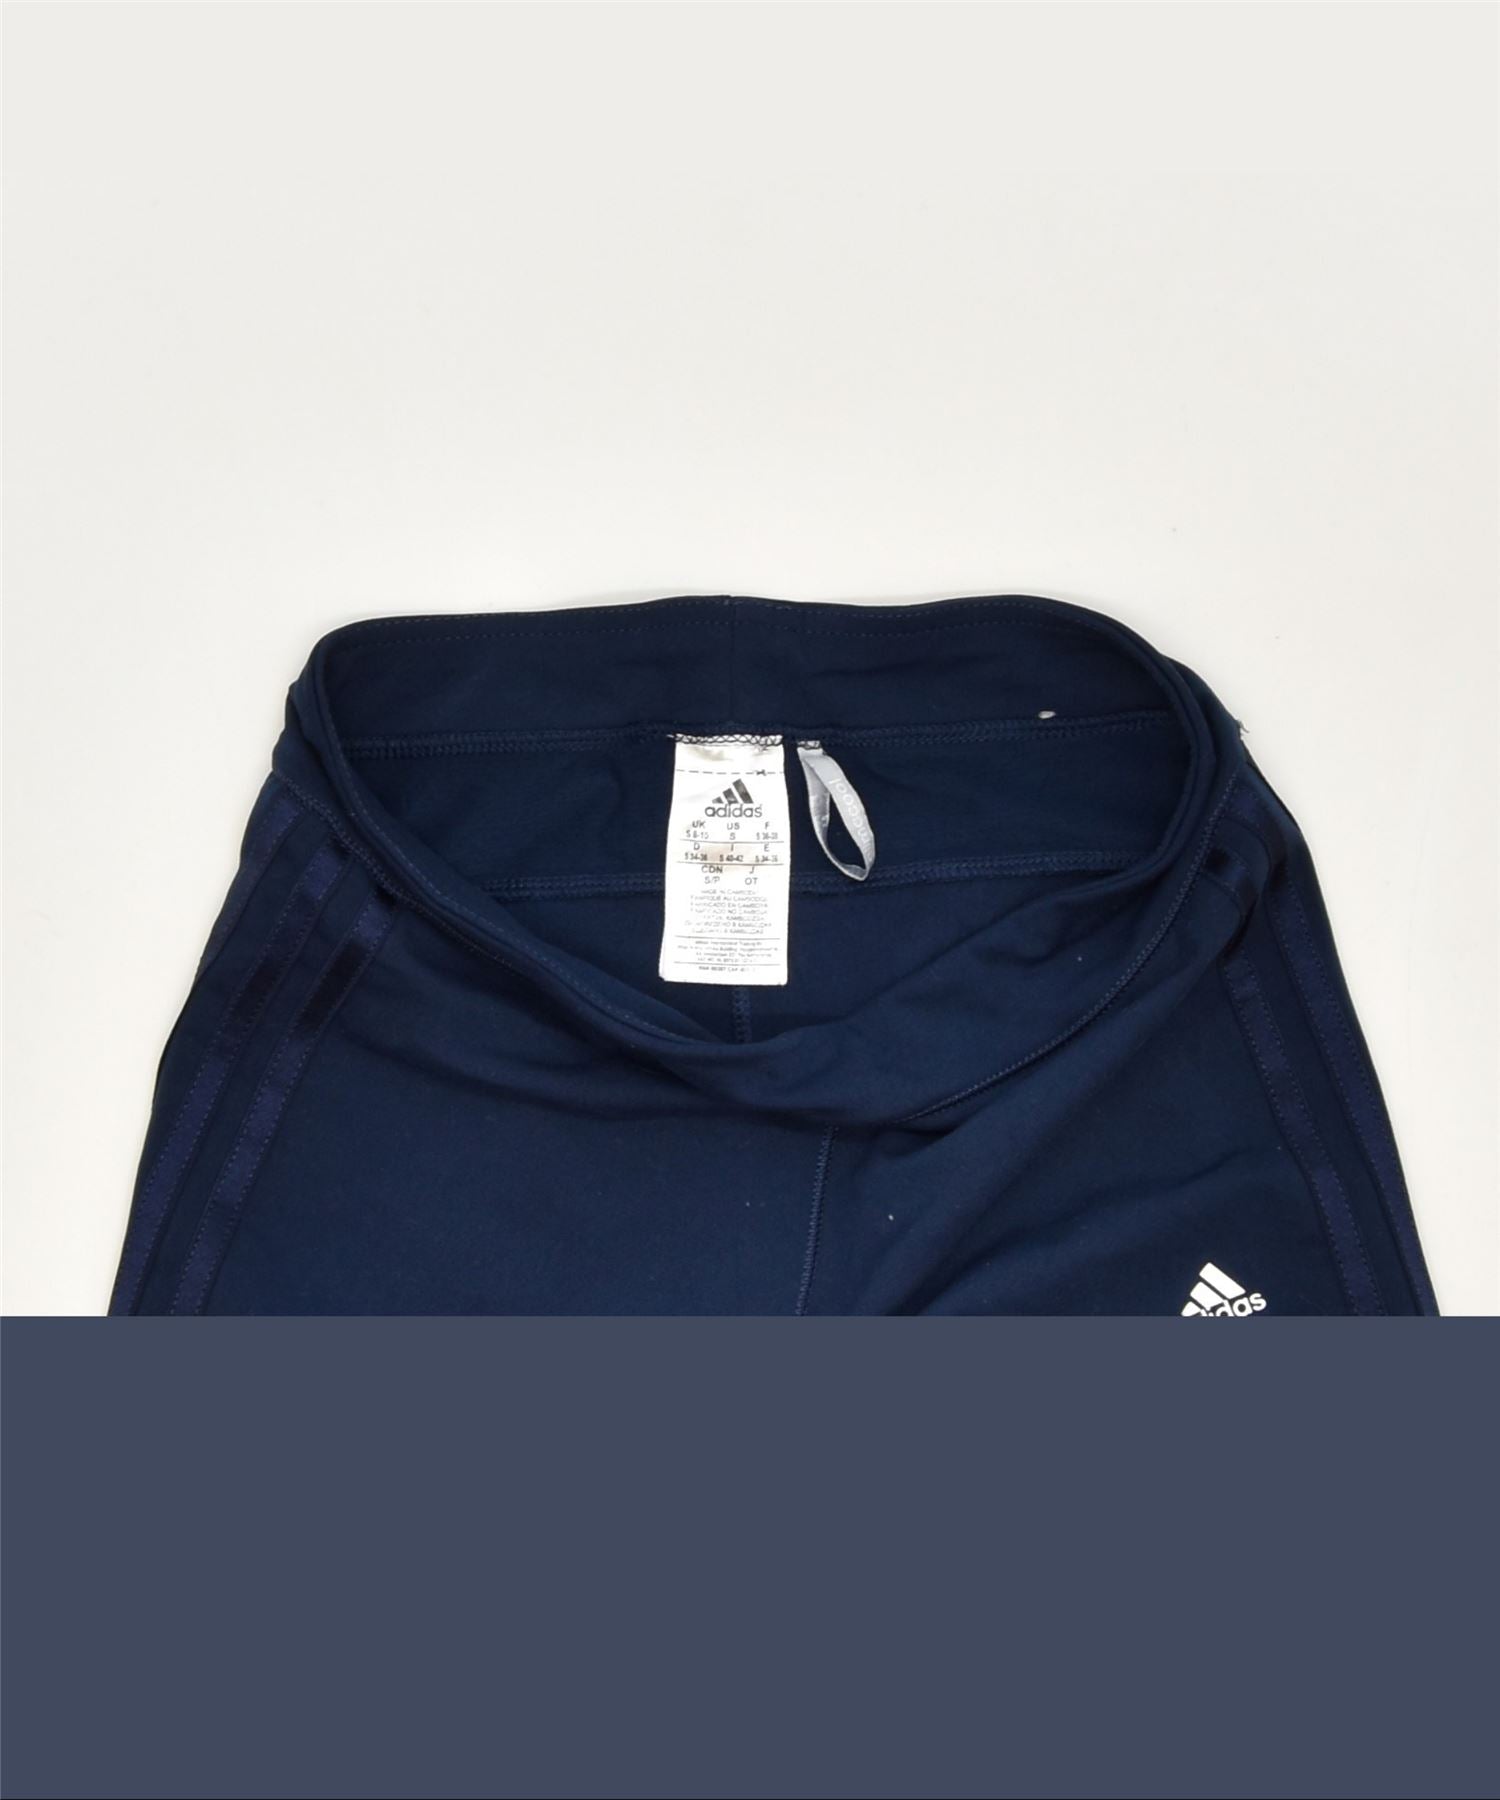 ADIDAS Womens Capri Leggings UK 8/10 Small Navy Blue Polyester Sports, Vintage & Second-Hand Clothing Online